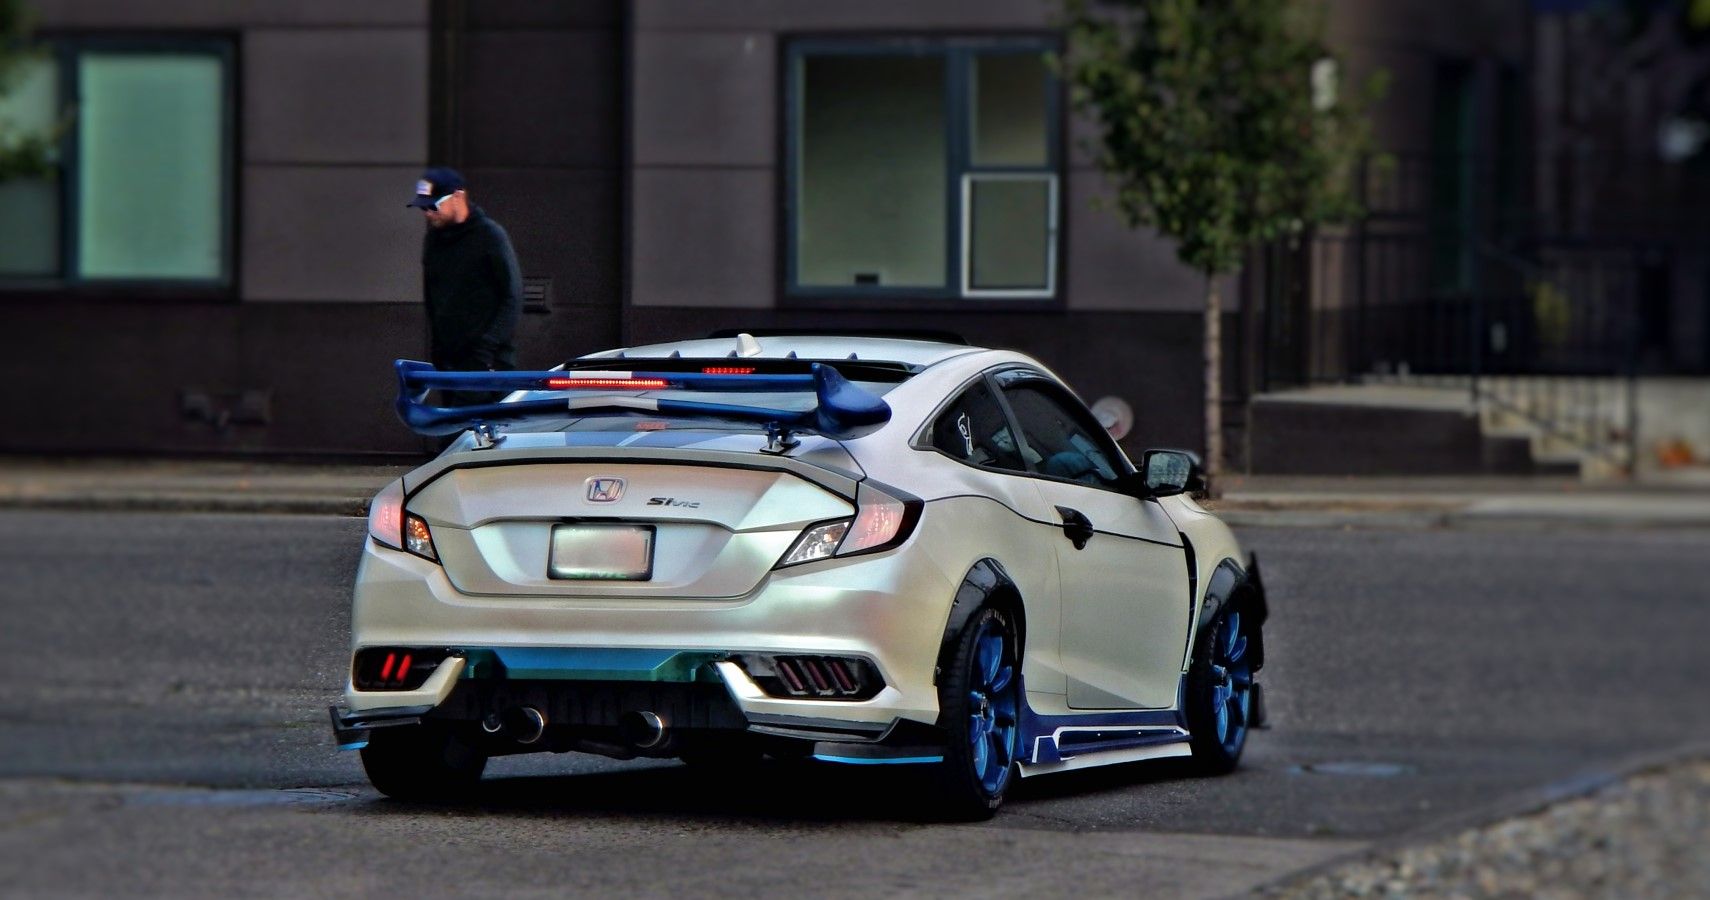 Honda Civic Si modified with a huge spoiler